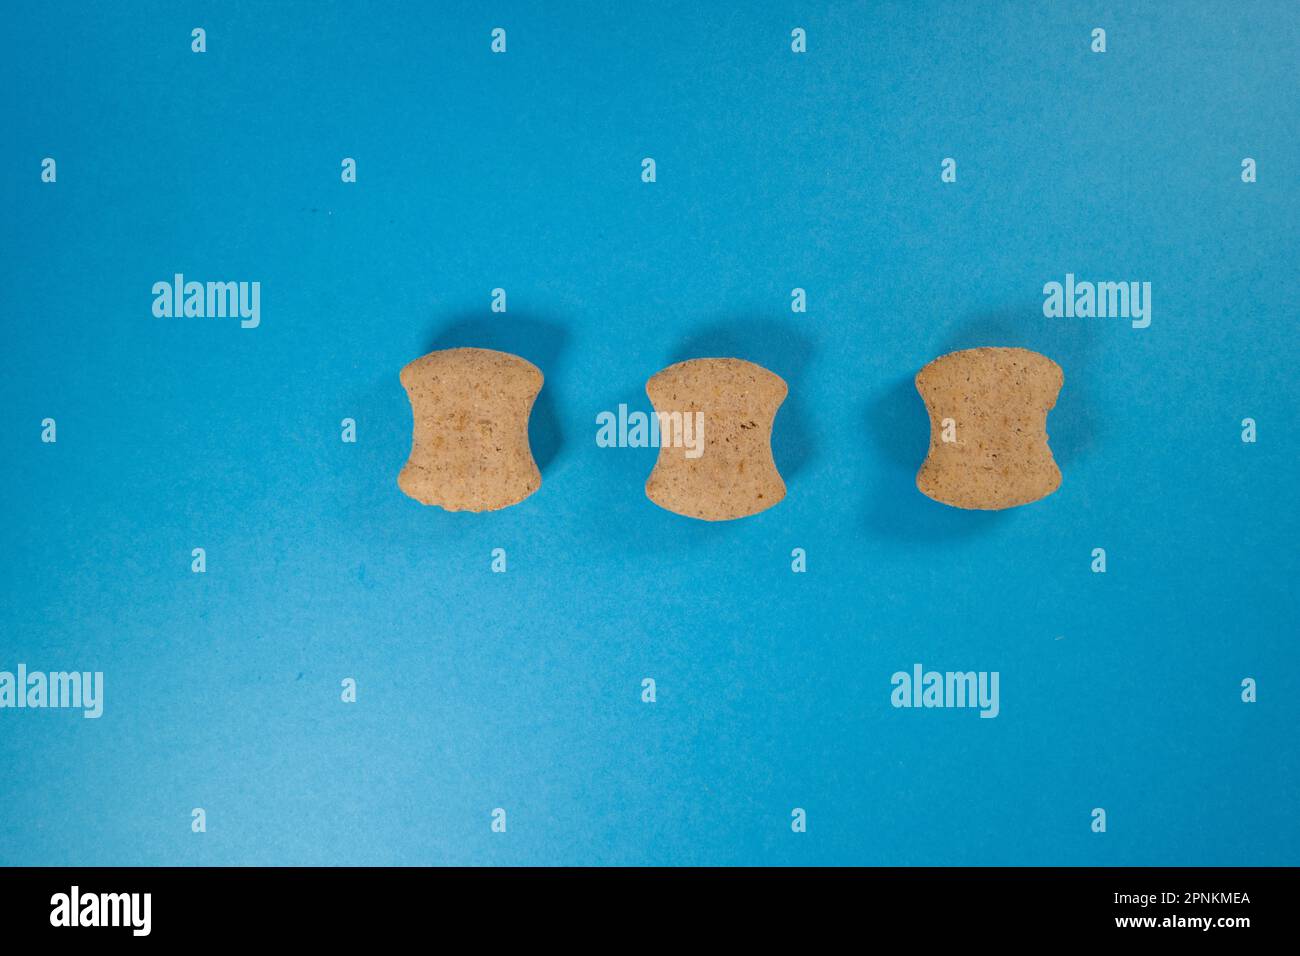 three dog biscuit isolated on a blue background Stock Photo